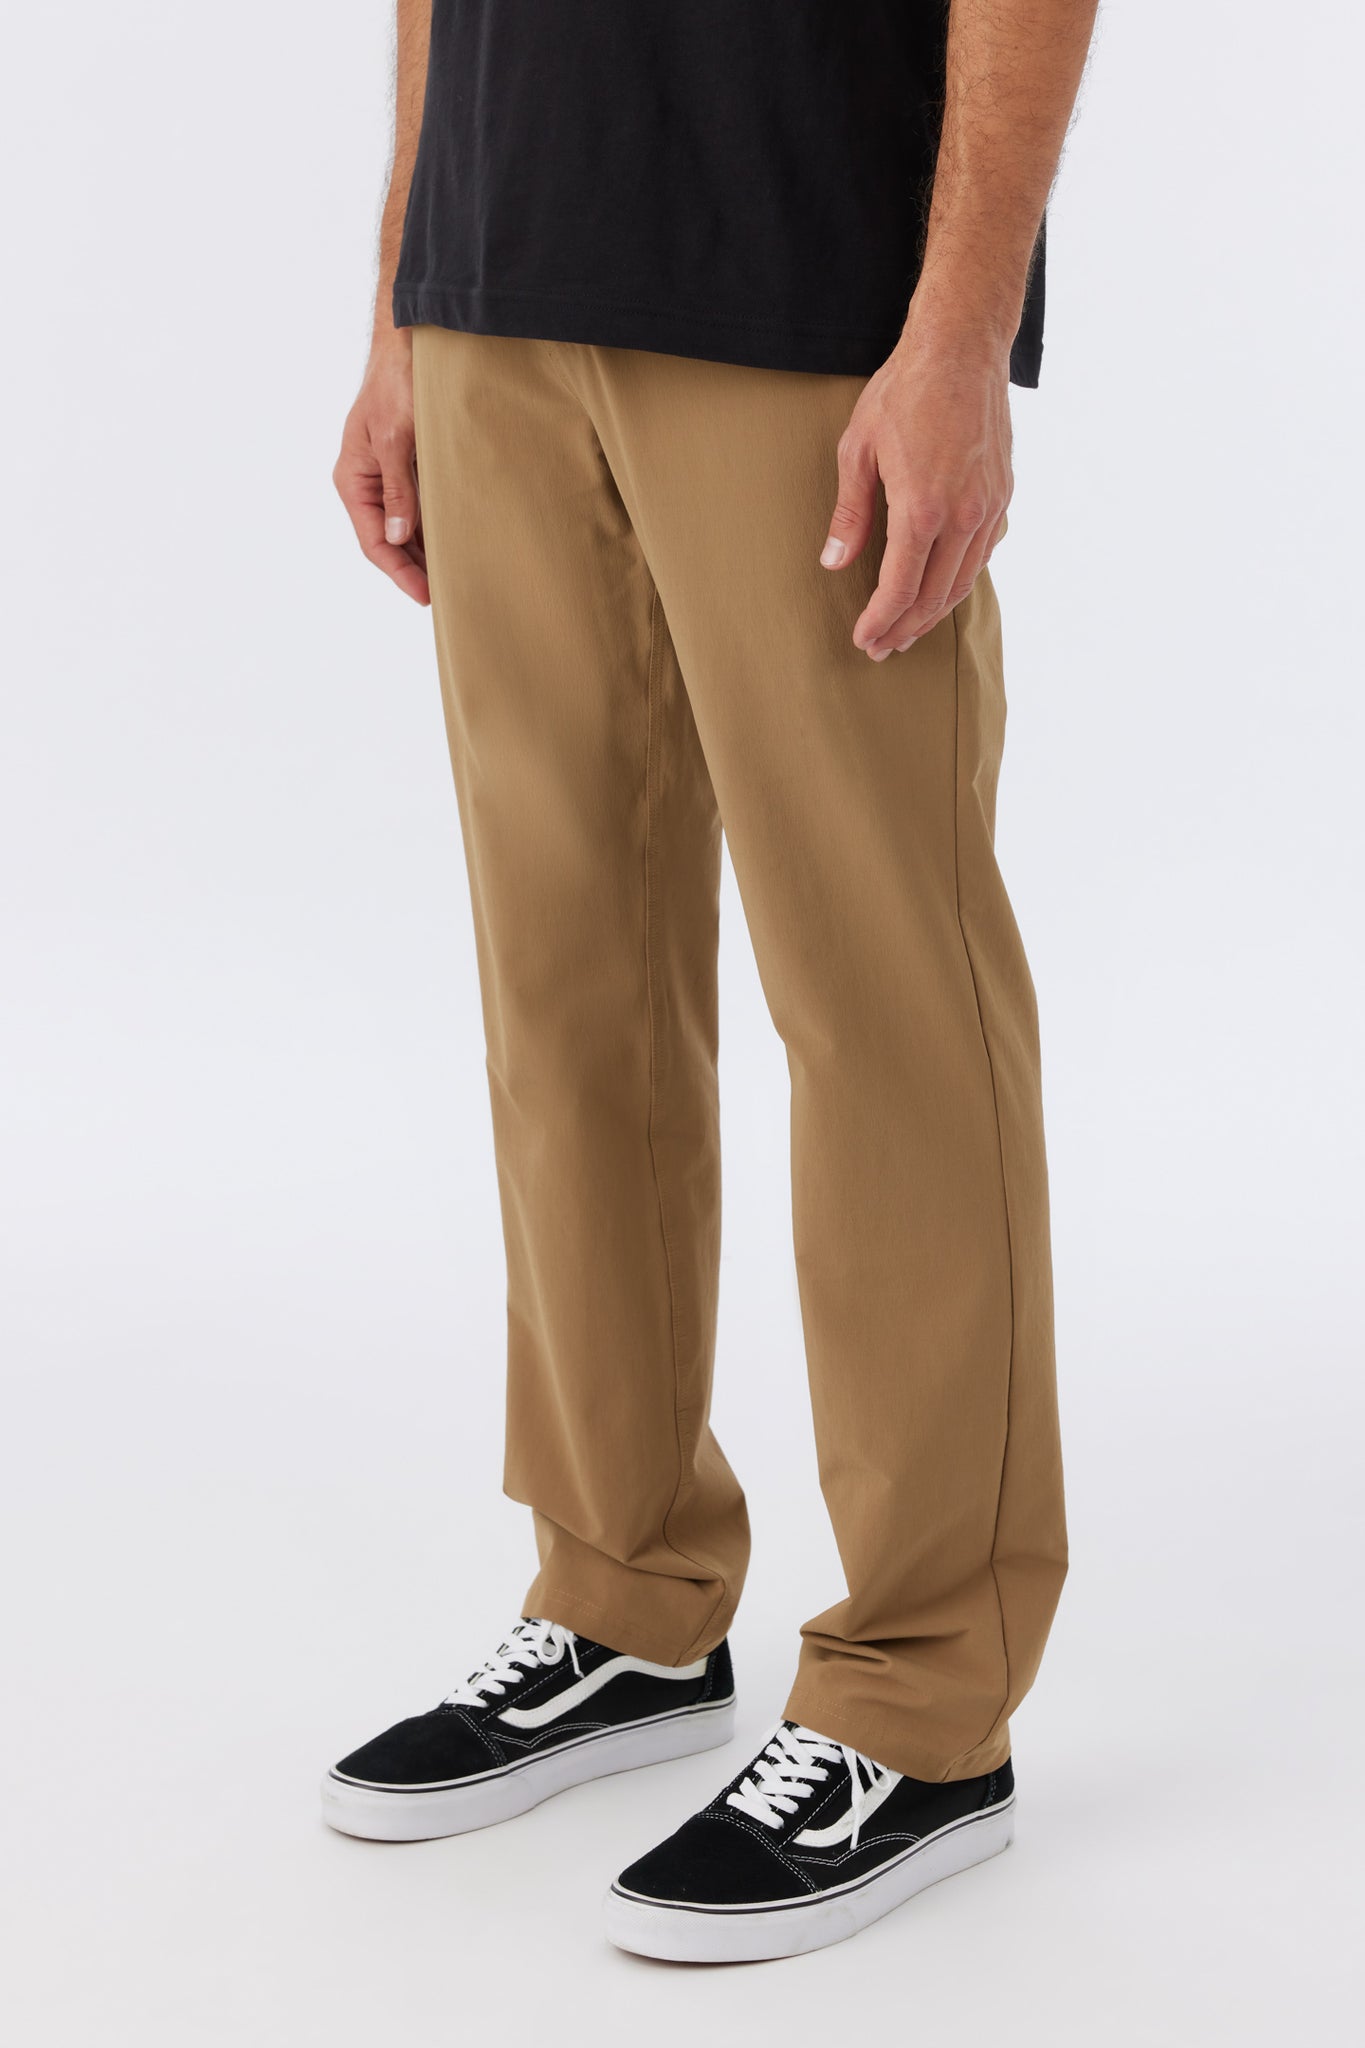 EAST CLIFF EXPEDITION HYBRID PANTS